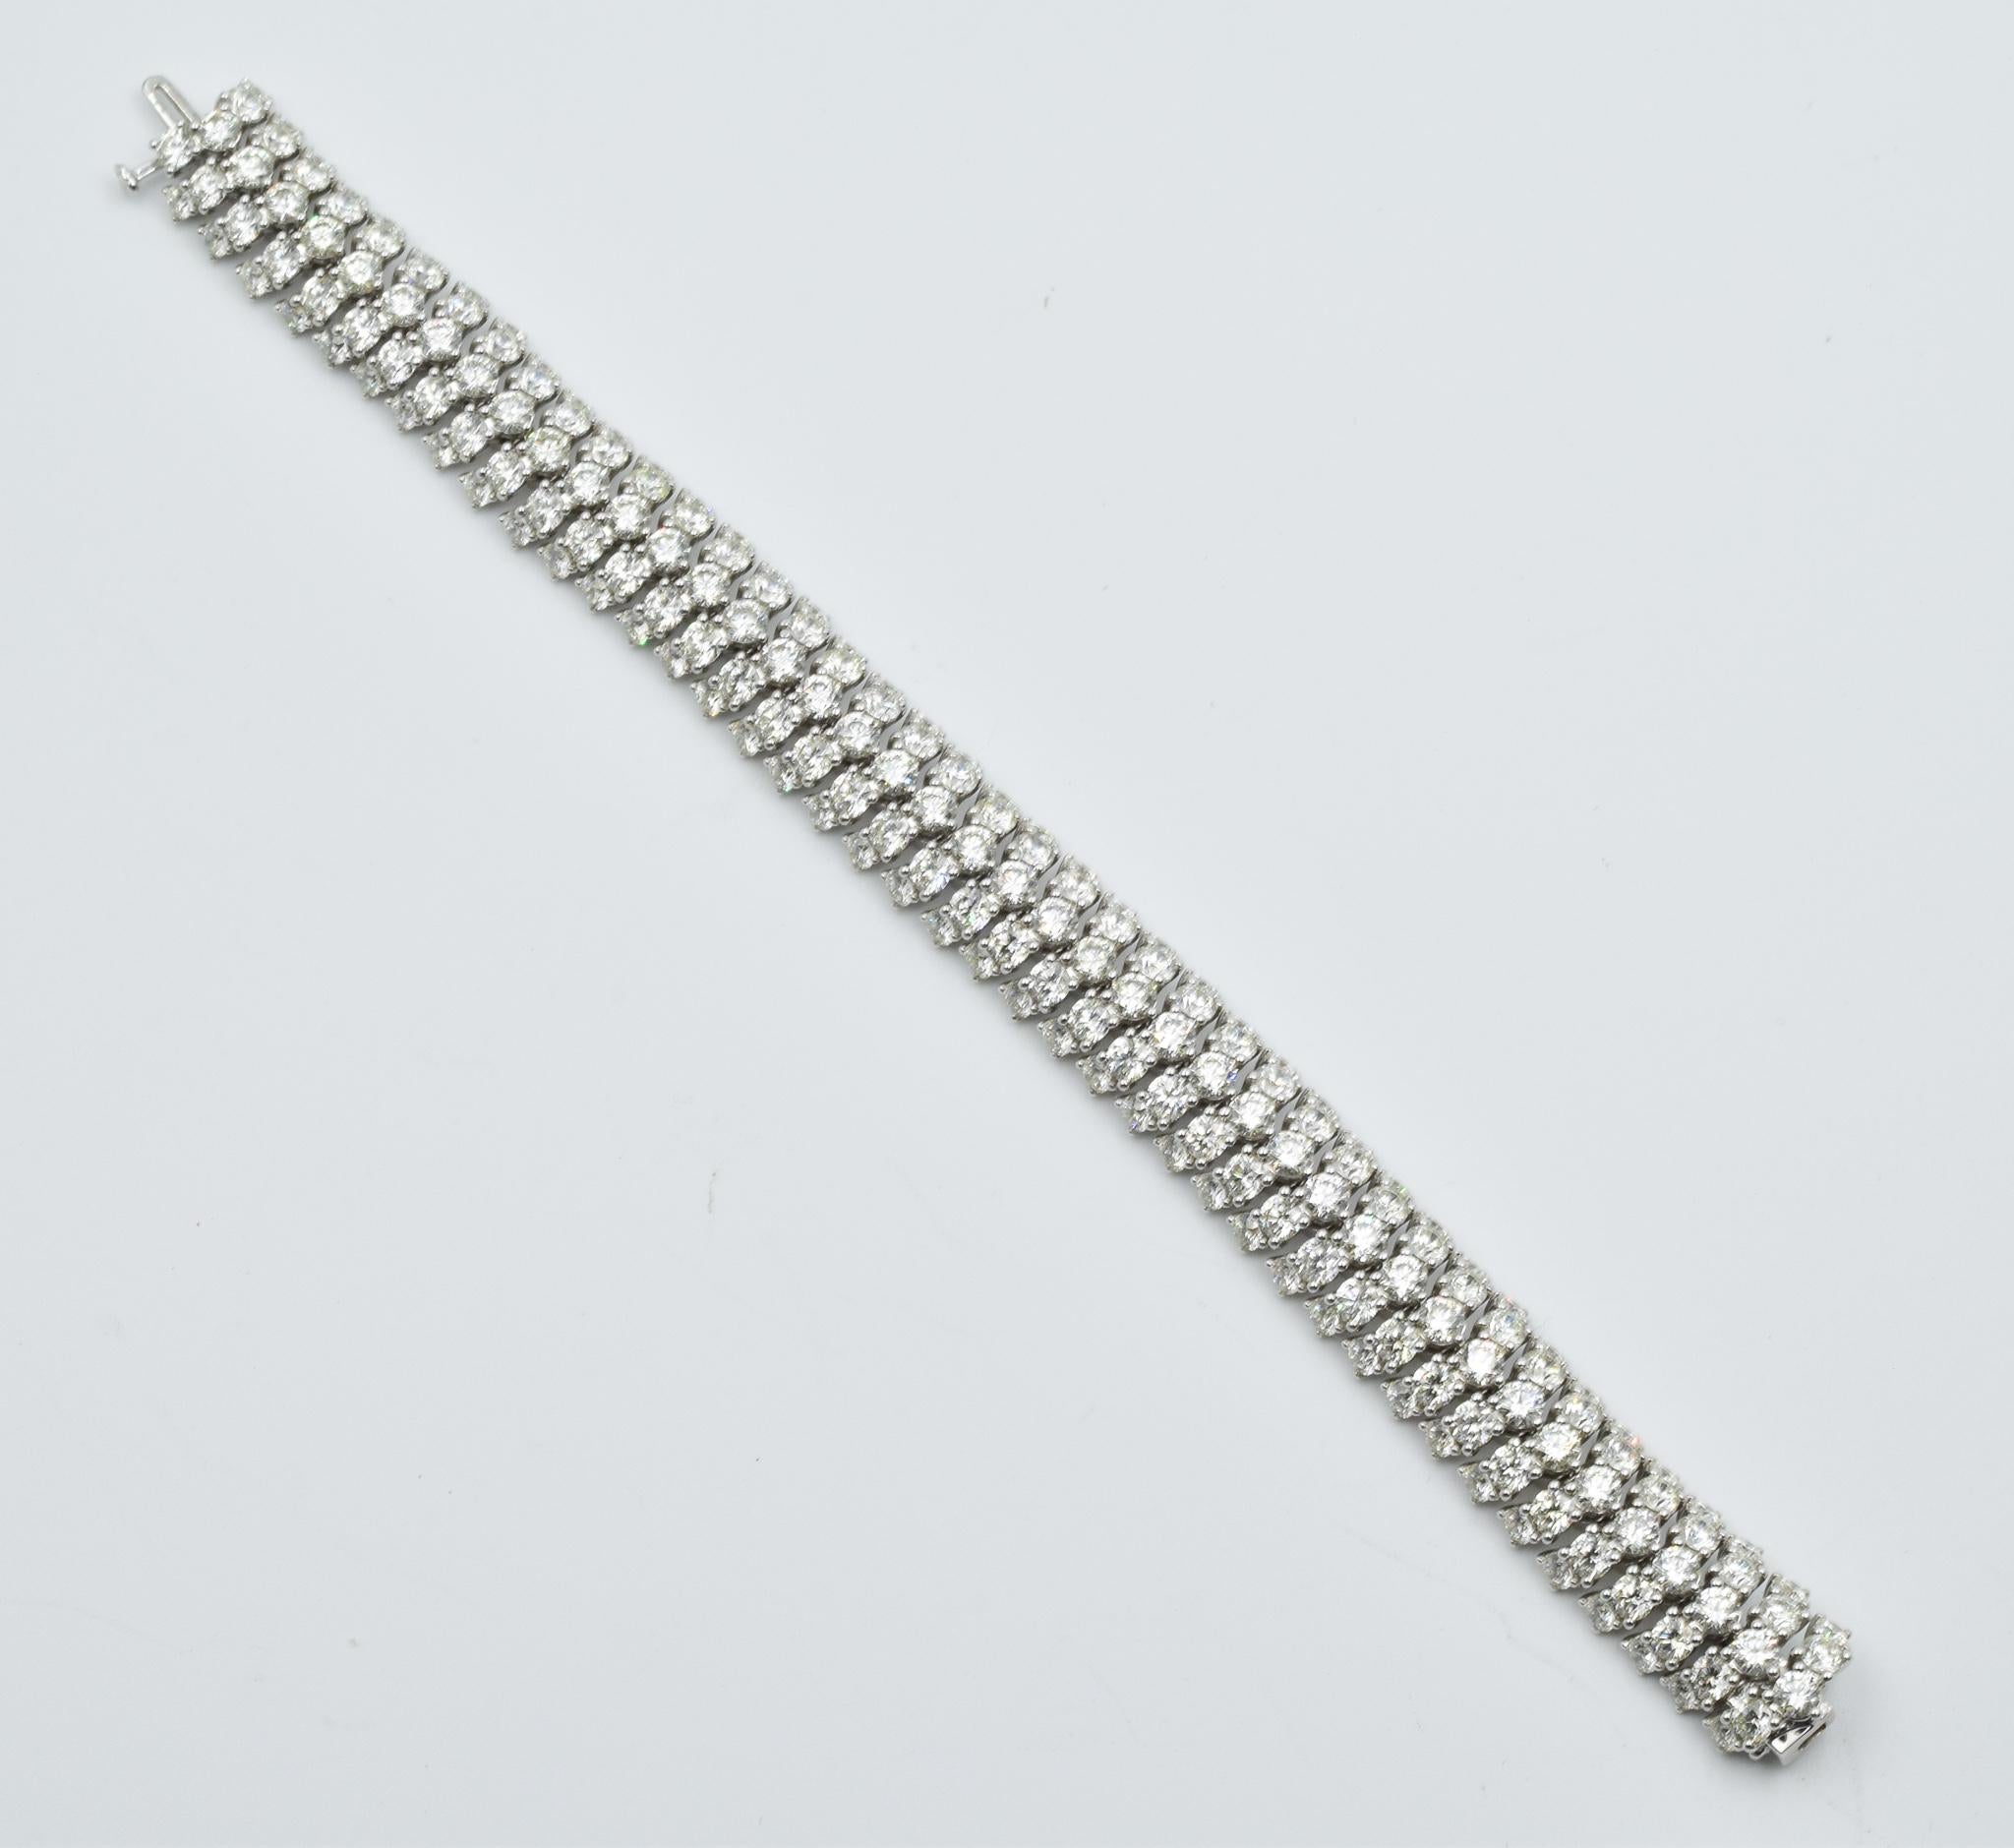 This beautiful flex bracelet is a stunning design which is easy to wear and an elegant showcase of style.  This bracelet features rows of diamonds which have an arch design and plenty of flexibility to wear comfortably.  The bracelet features